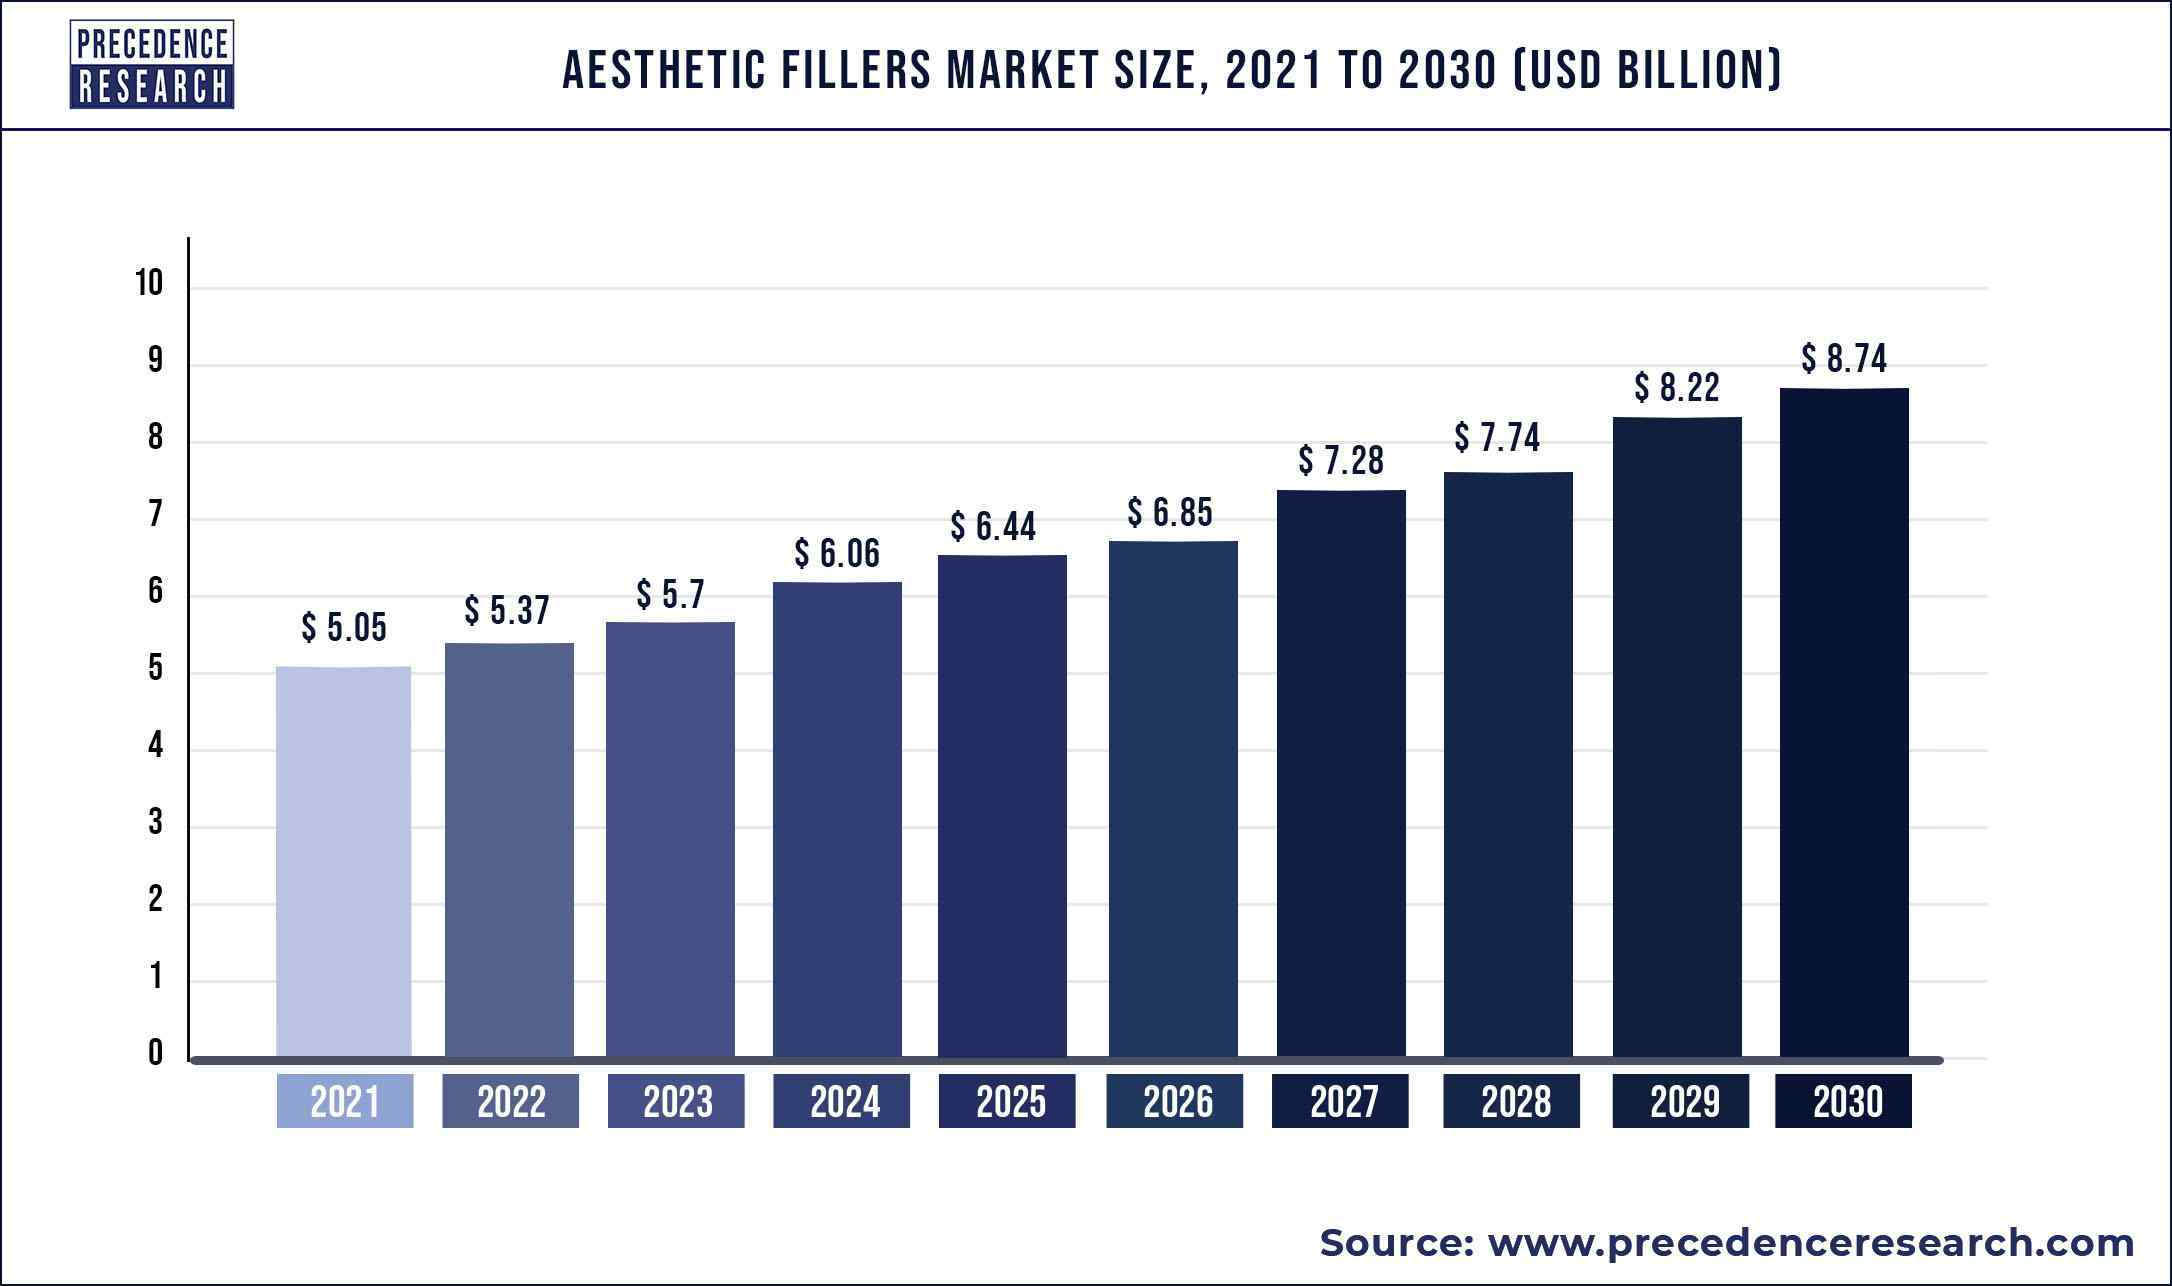 Aesthetic Fillers Market Size 2021 to 2030